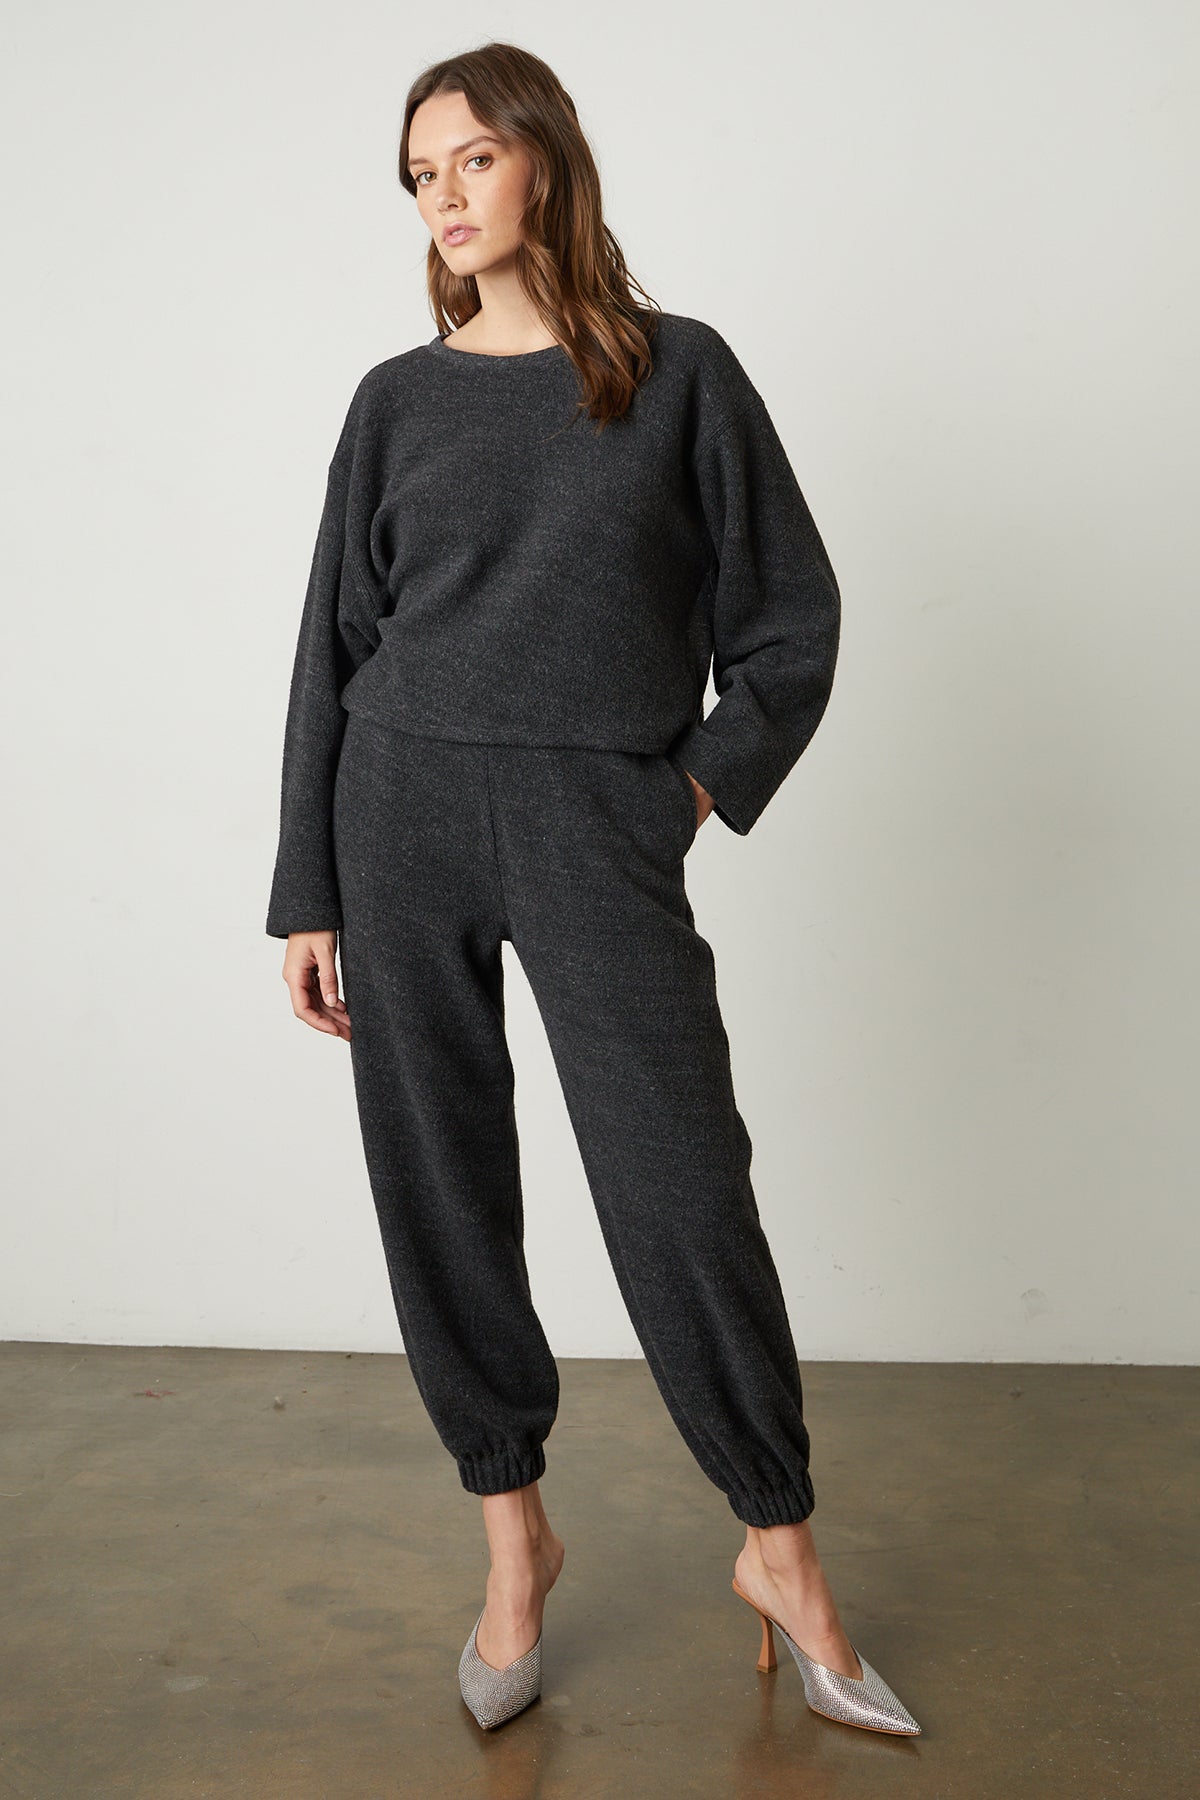 The model is wearing a Charcoal Arissa Cropped Sweatshirt and joggers from Velvet by Graham & Spencer.-26068055589057